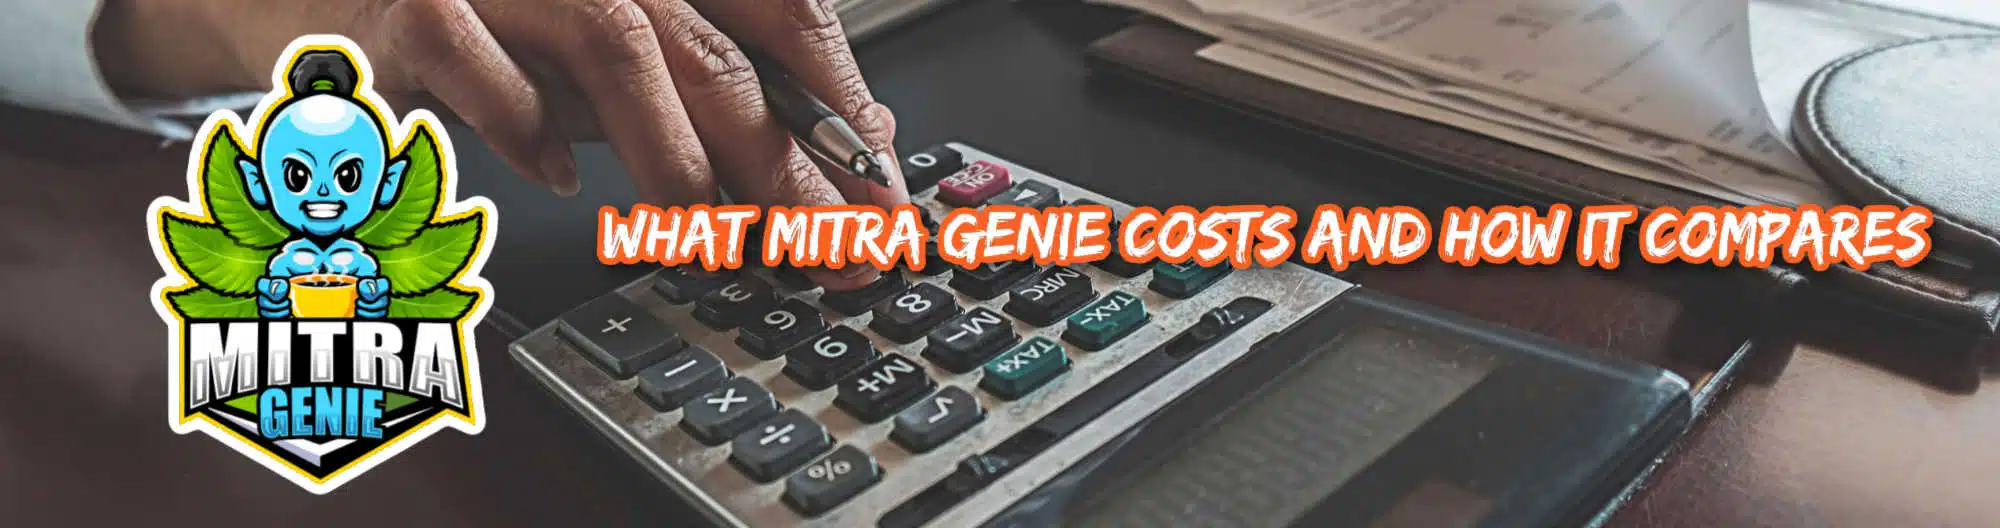 image of mitra genie cost and how it compares